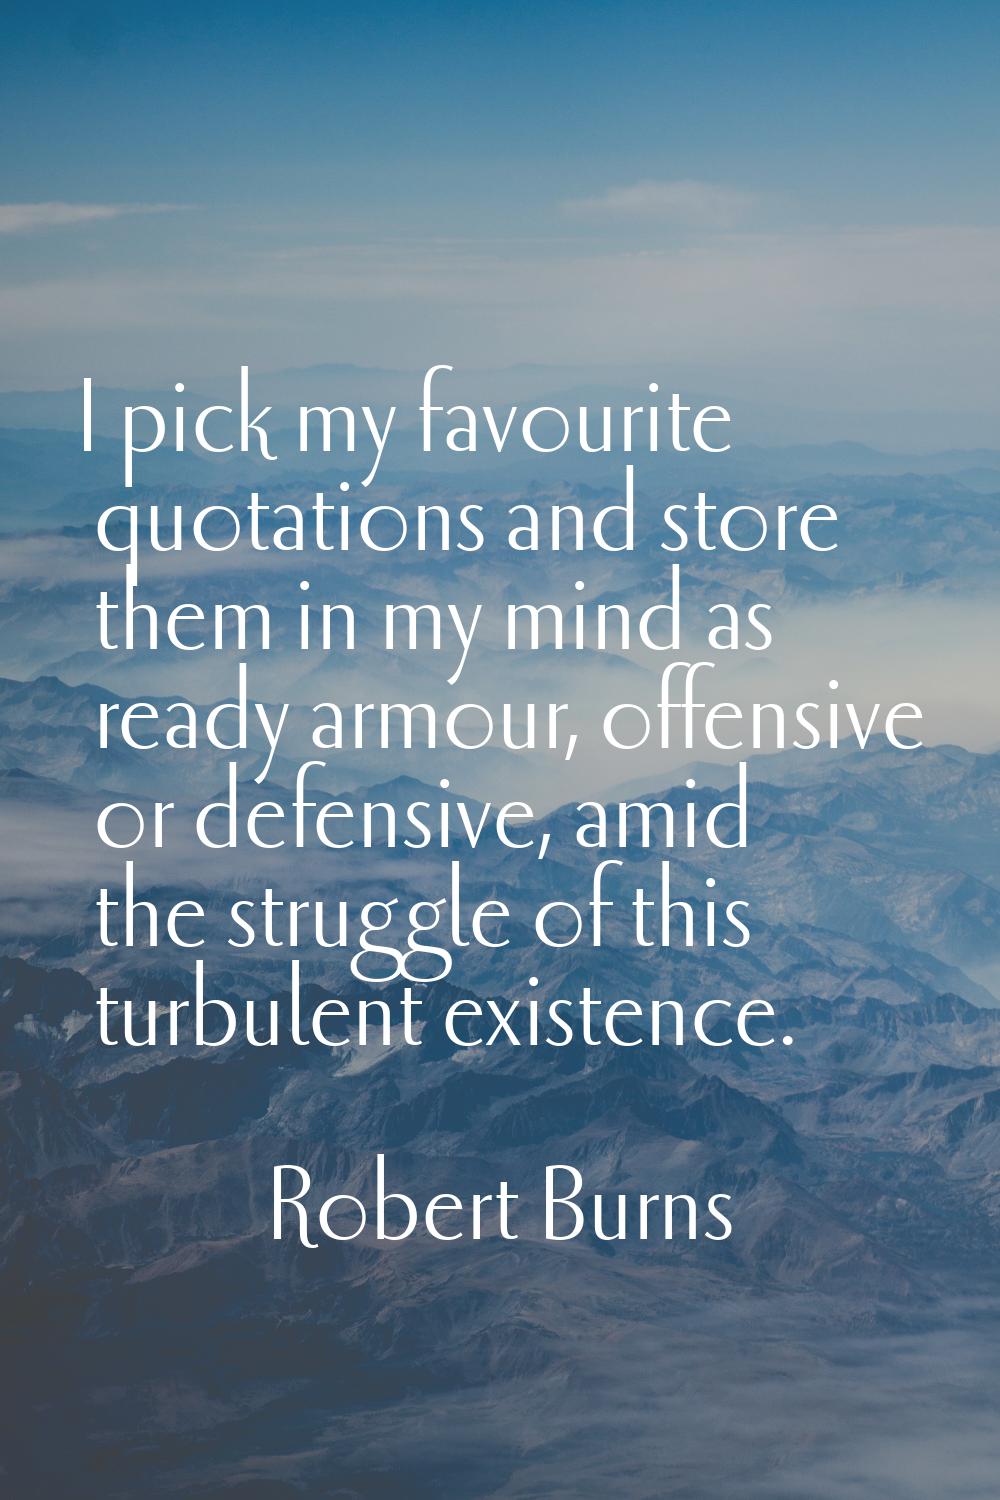 I pick my favourite quotations and store them in my mind as ready armour, offensive or defensive, a